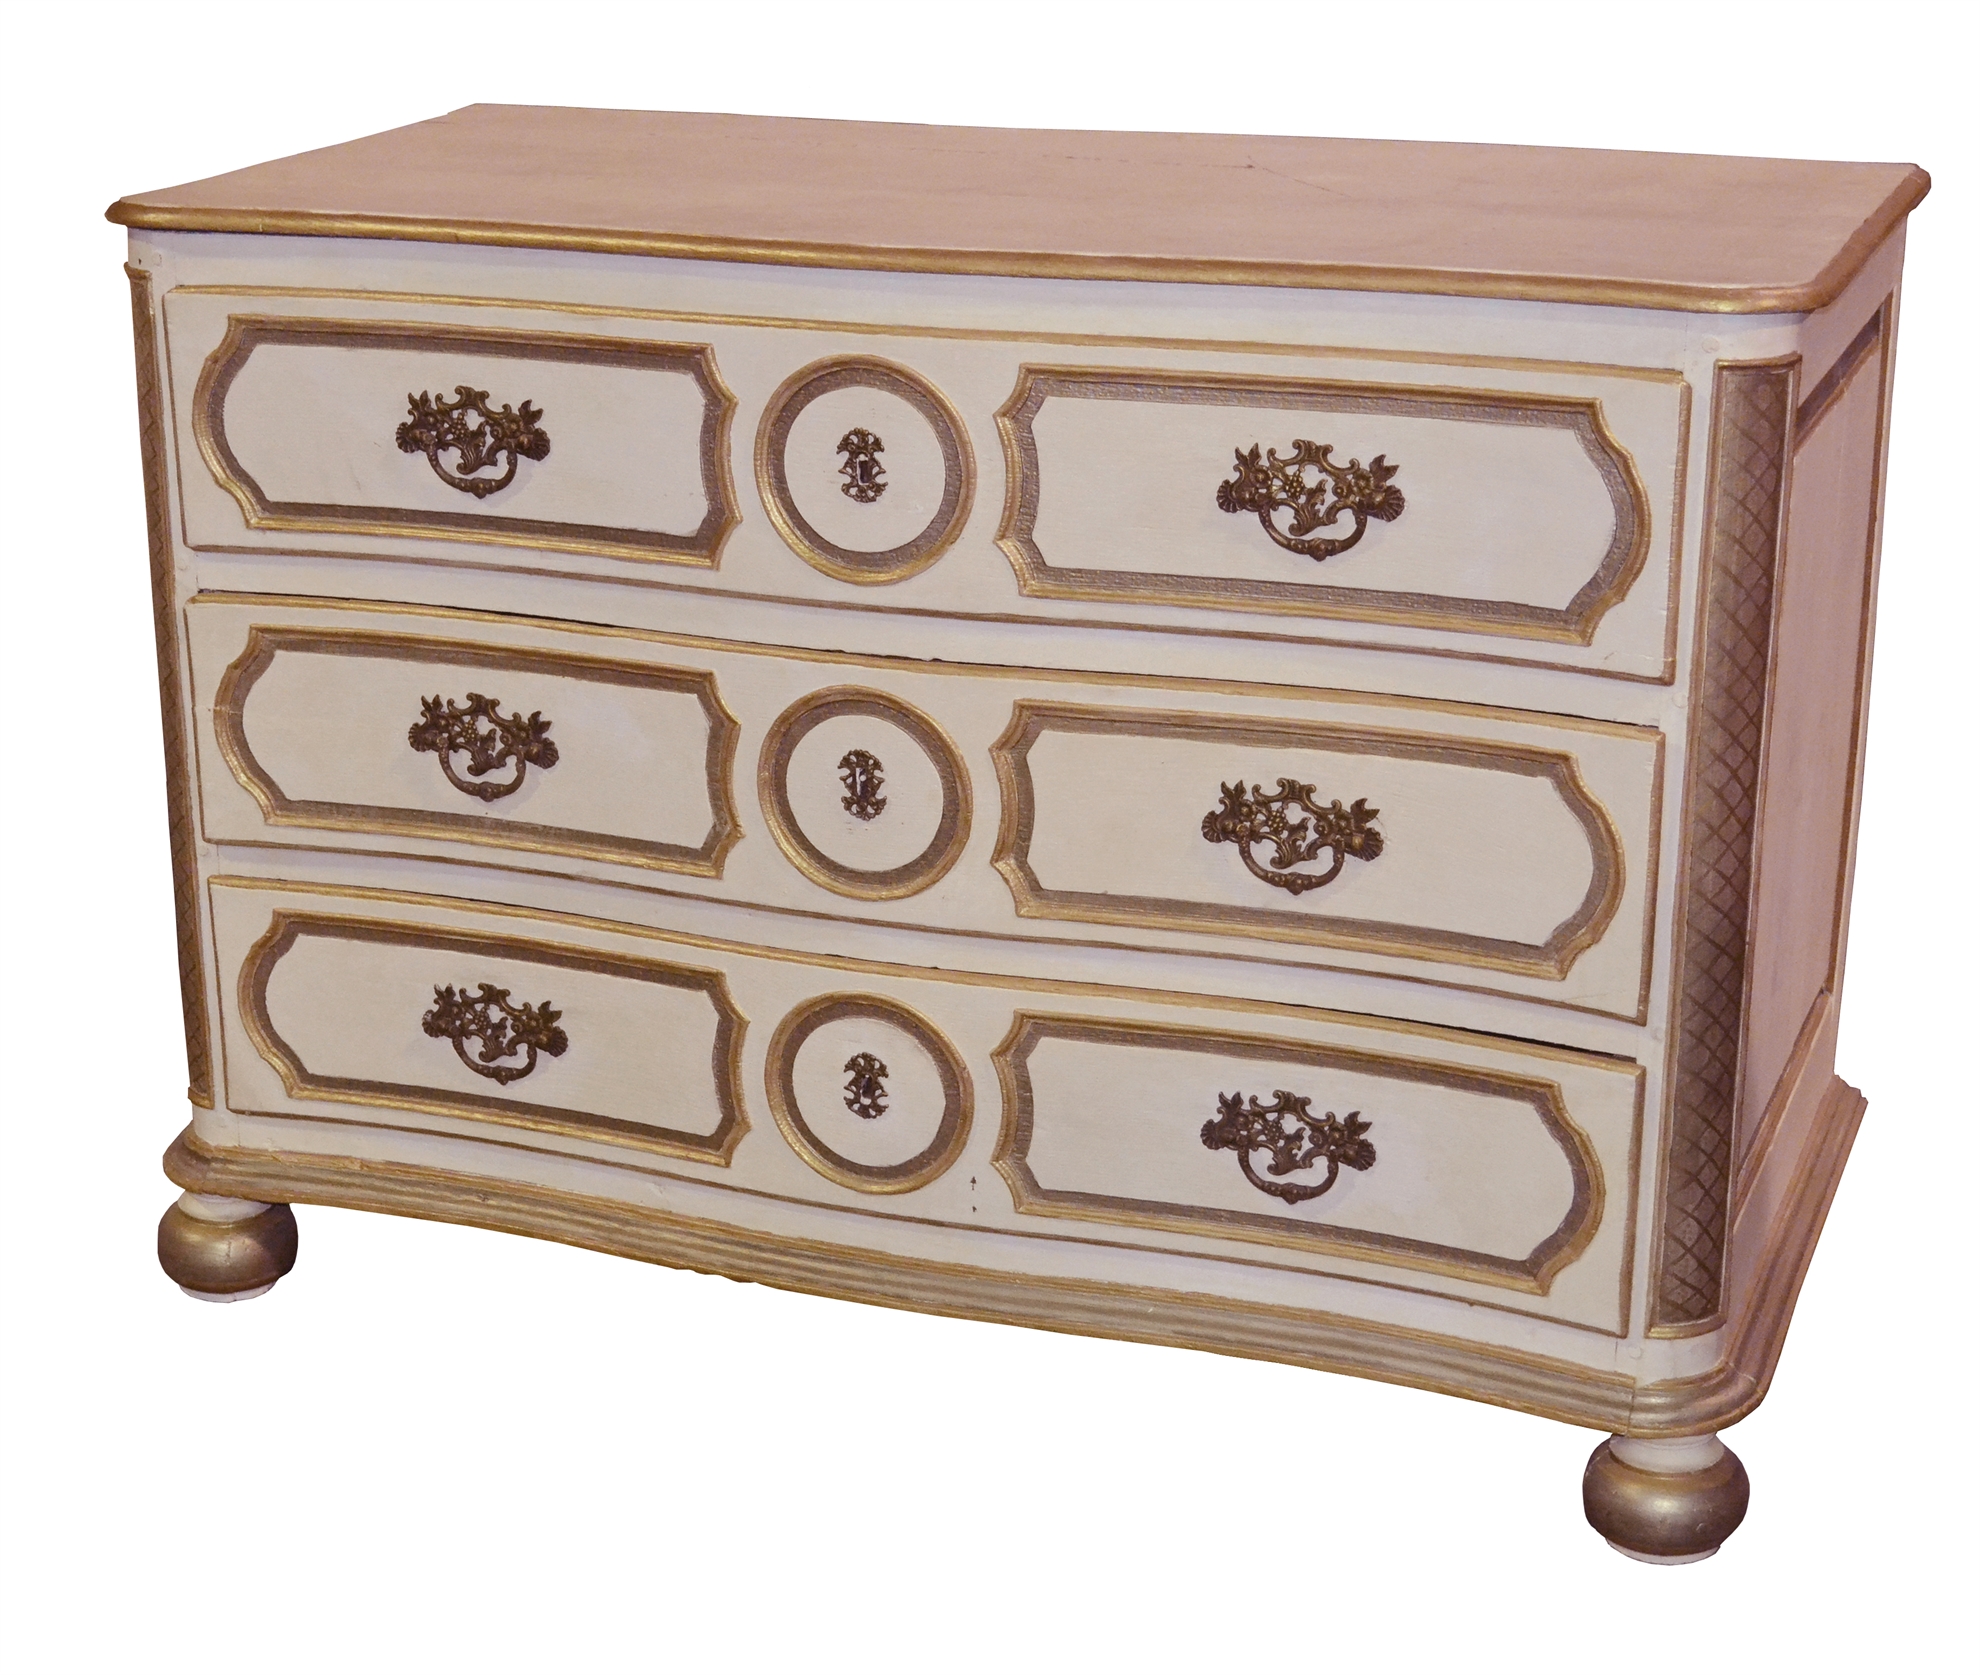 105/2032a - Painted Arras Commode